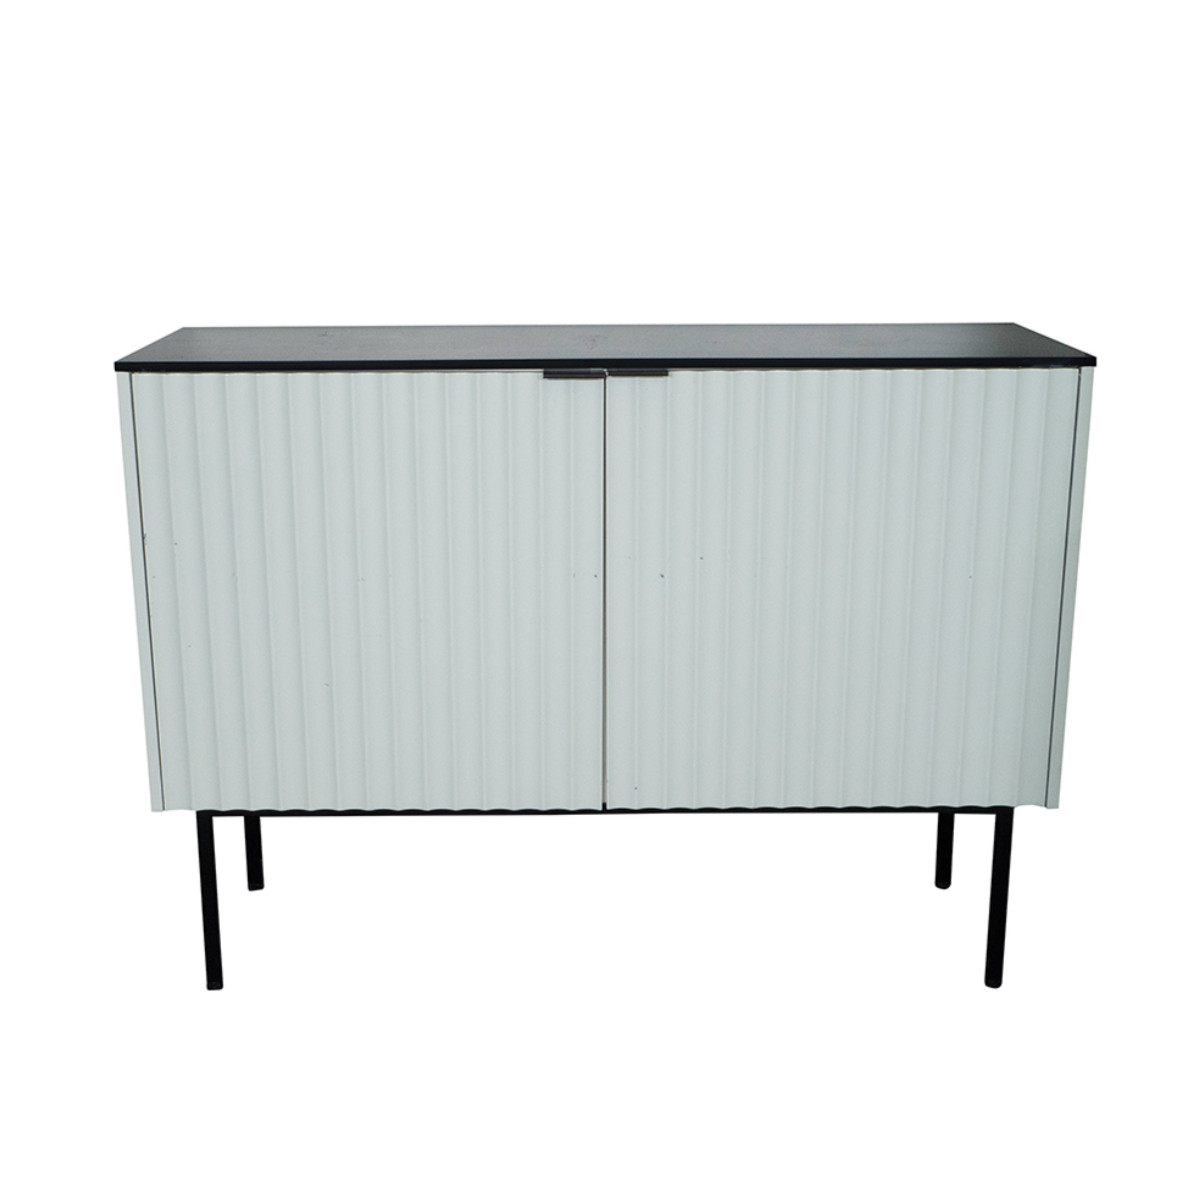 Modern channeled front cabinets